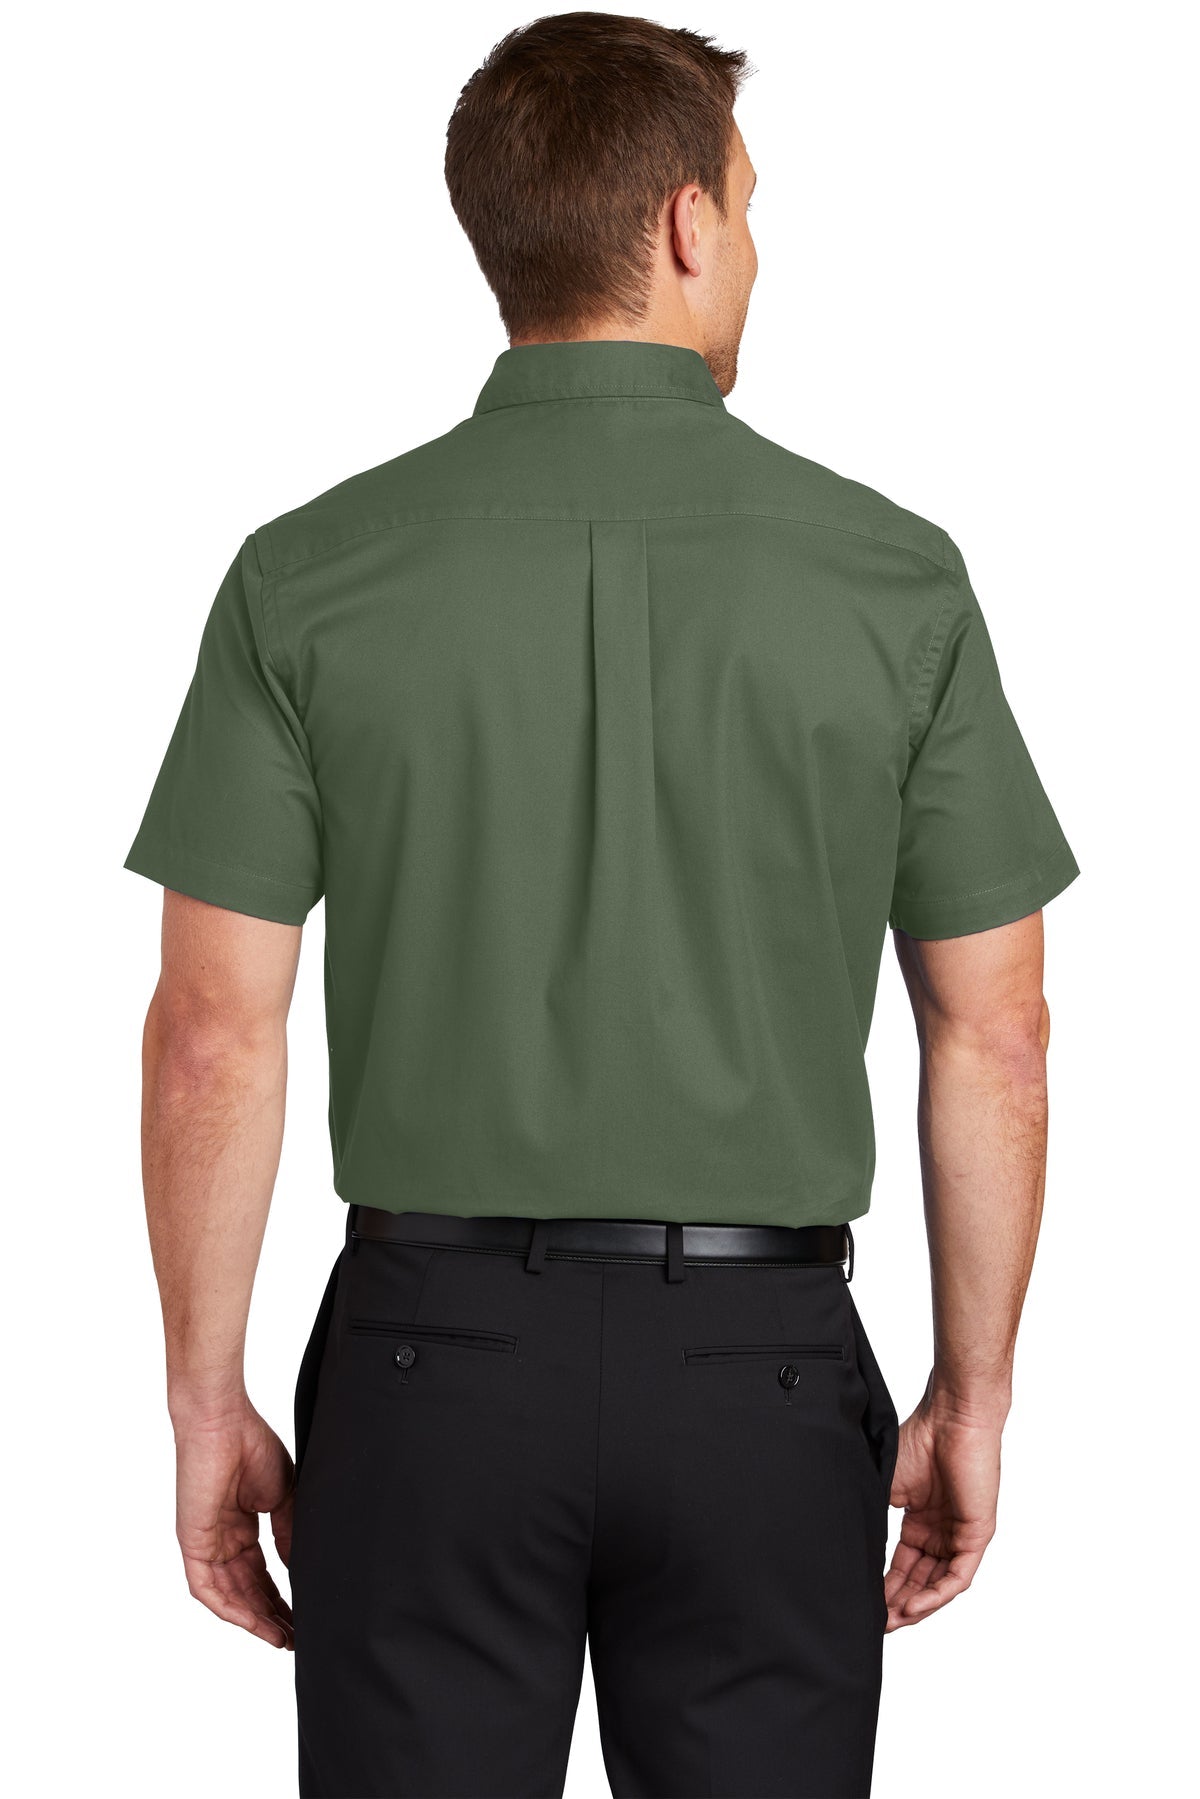 port authority_s508 _clover green_company_logo_button downs